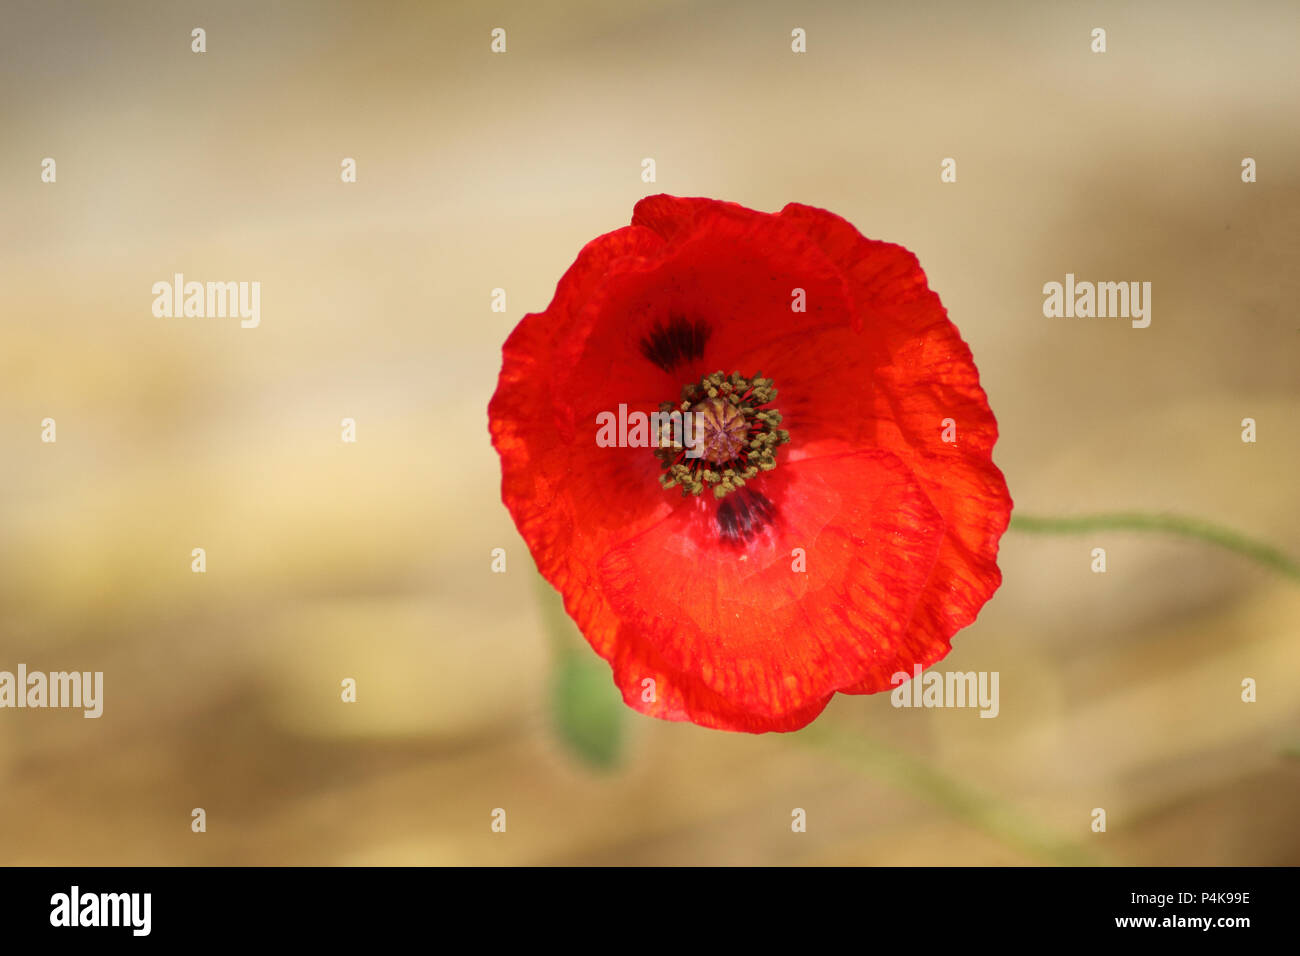 a close-up of a poppy red poppy flower and its visible pistil Stock Photo